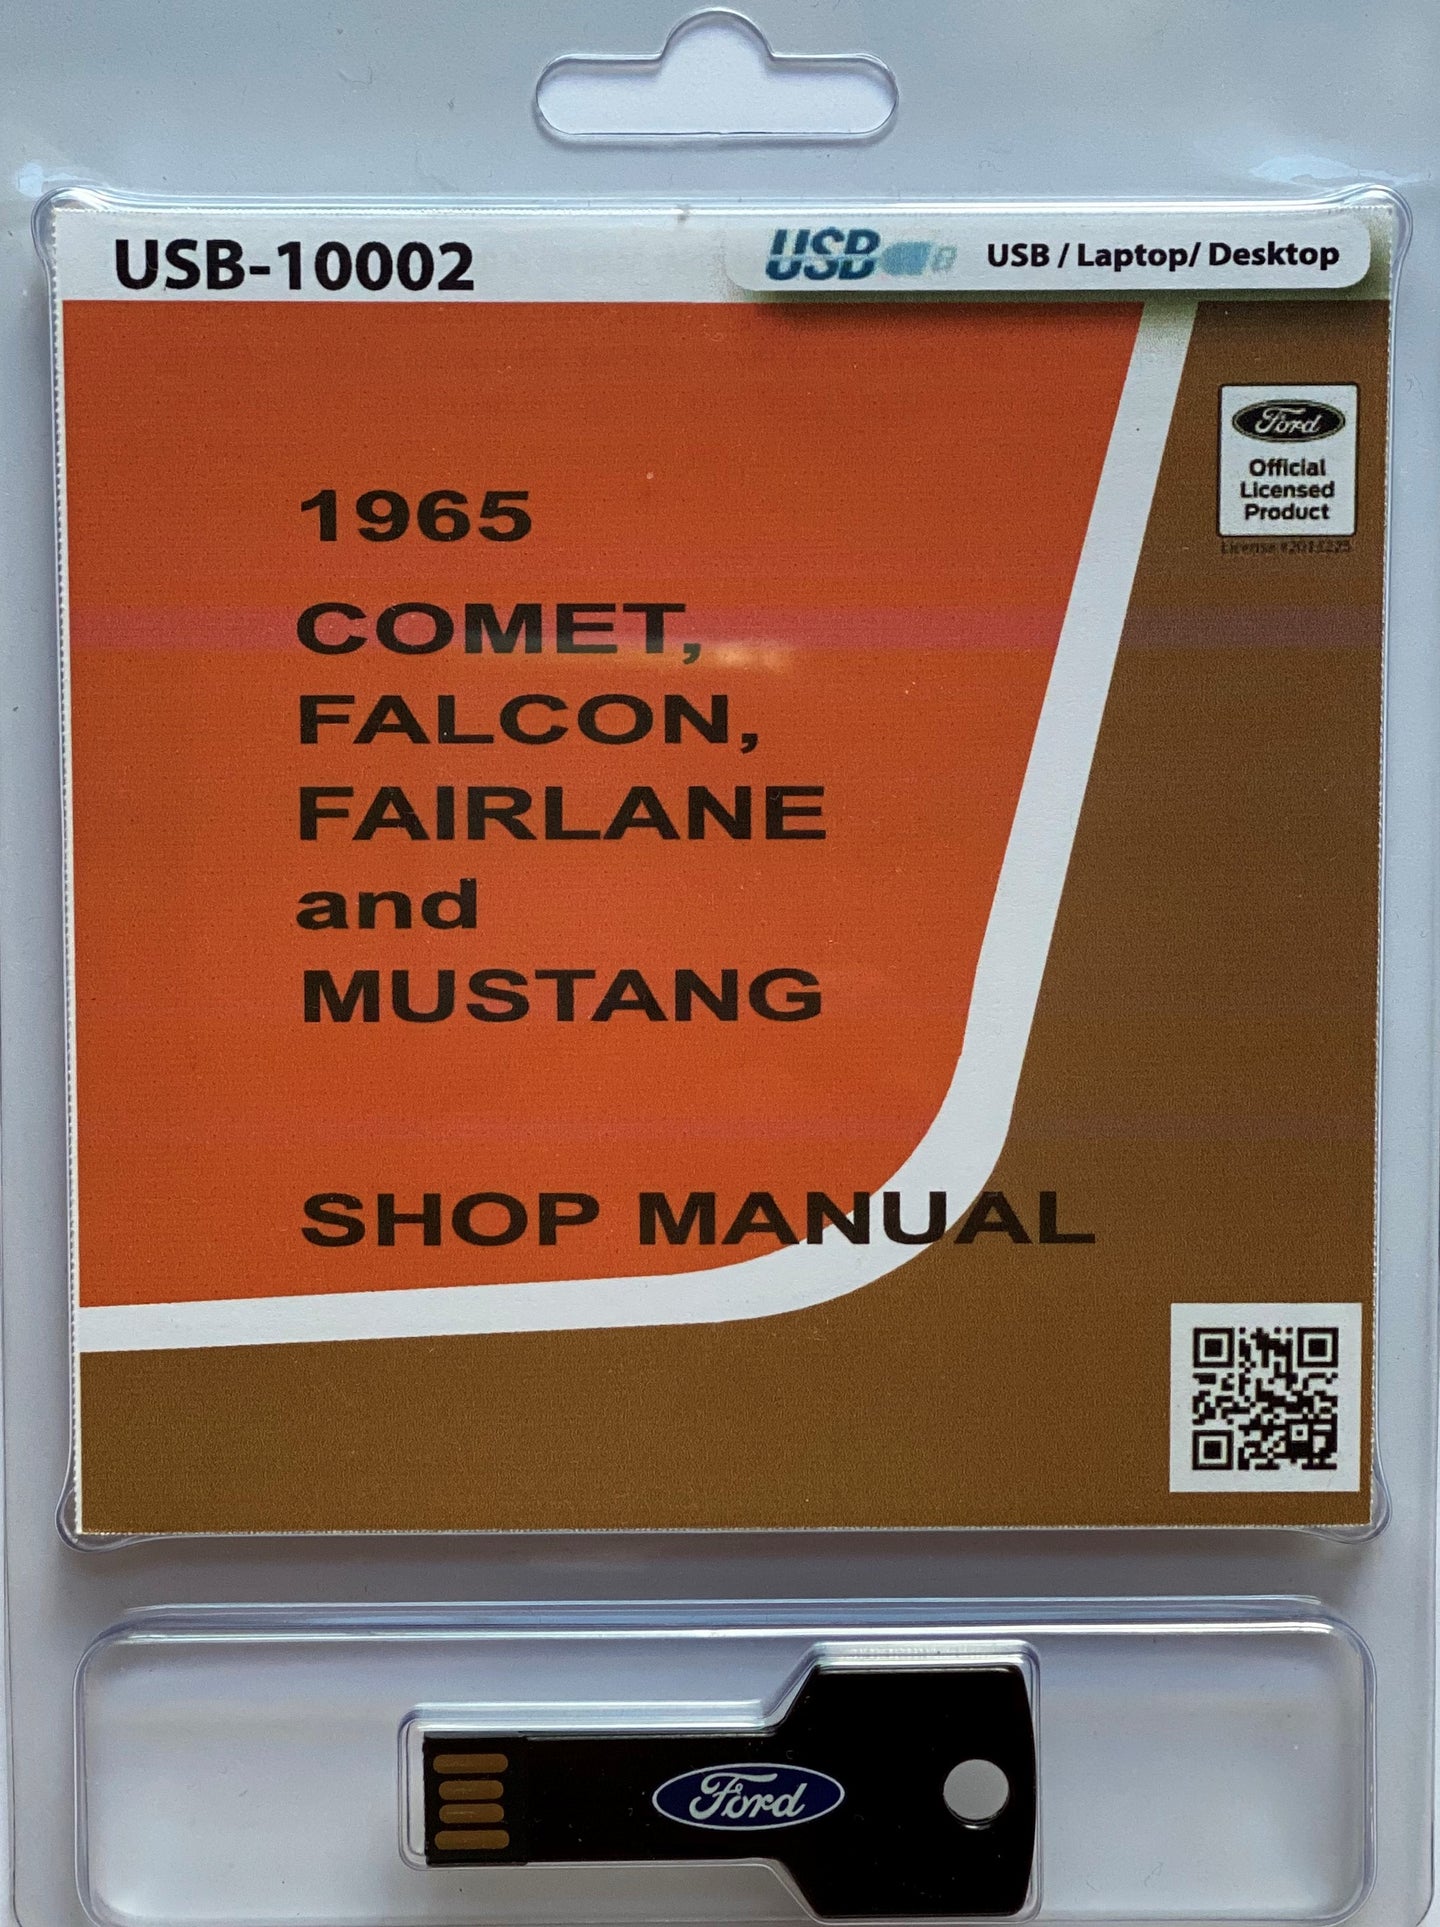 1965 Comet Falcon Fairlane and Mustang Shop Manual On USB Drive